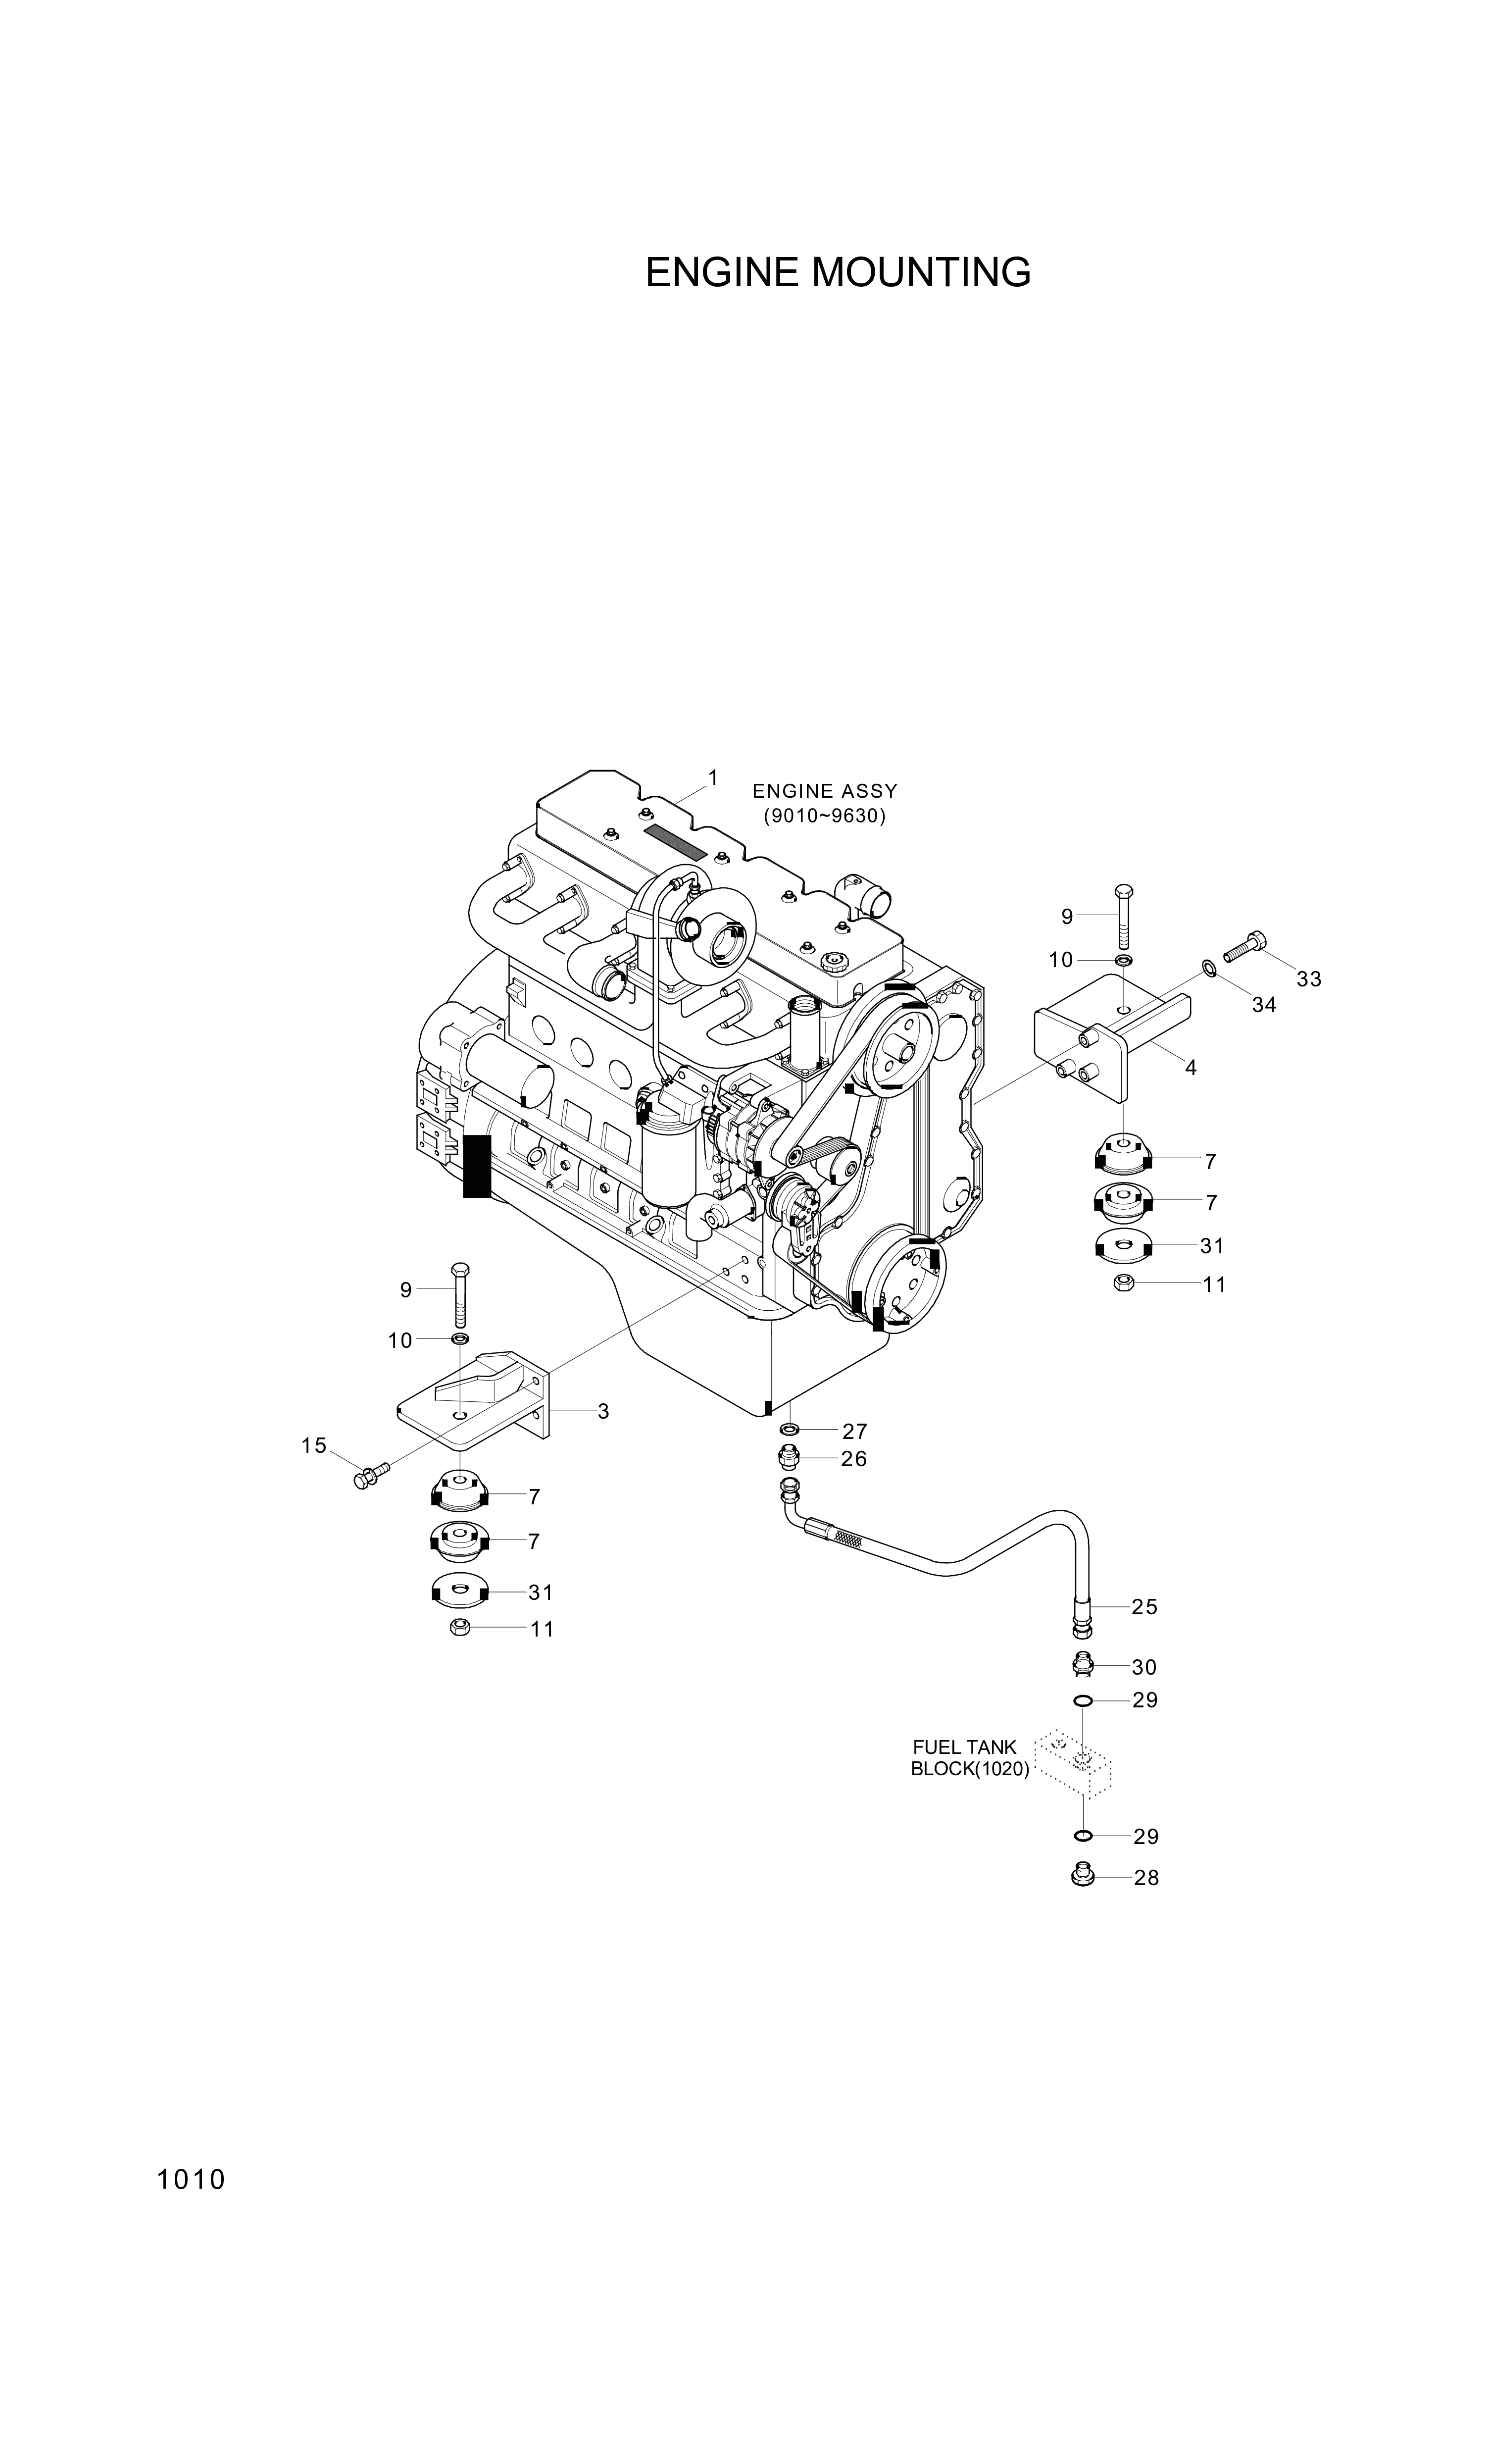 drawing for Hyundai Construction Equipment 11LD-01000 - ENGINE ASSY